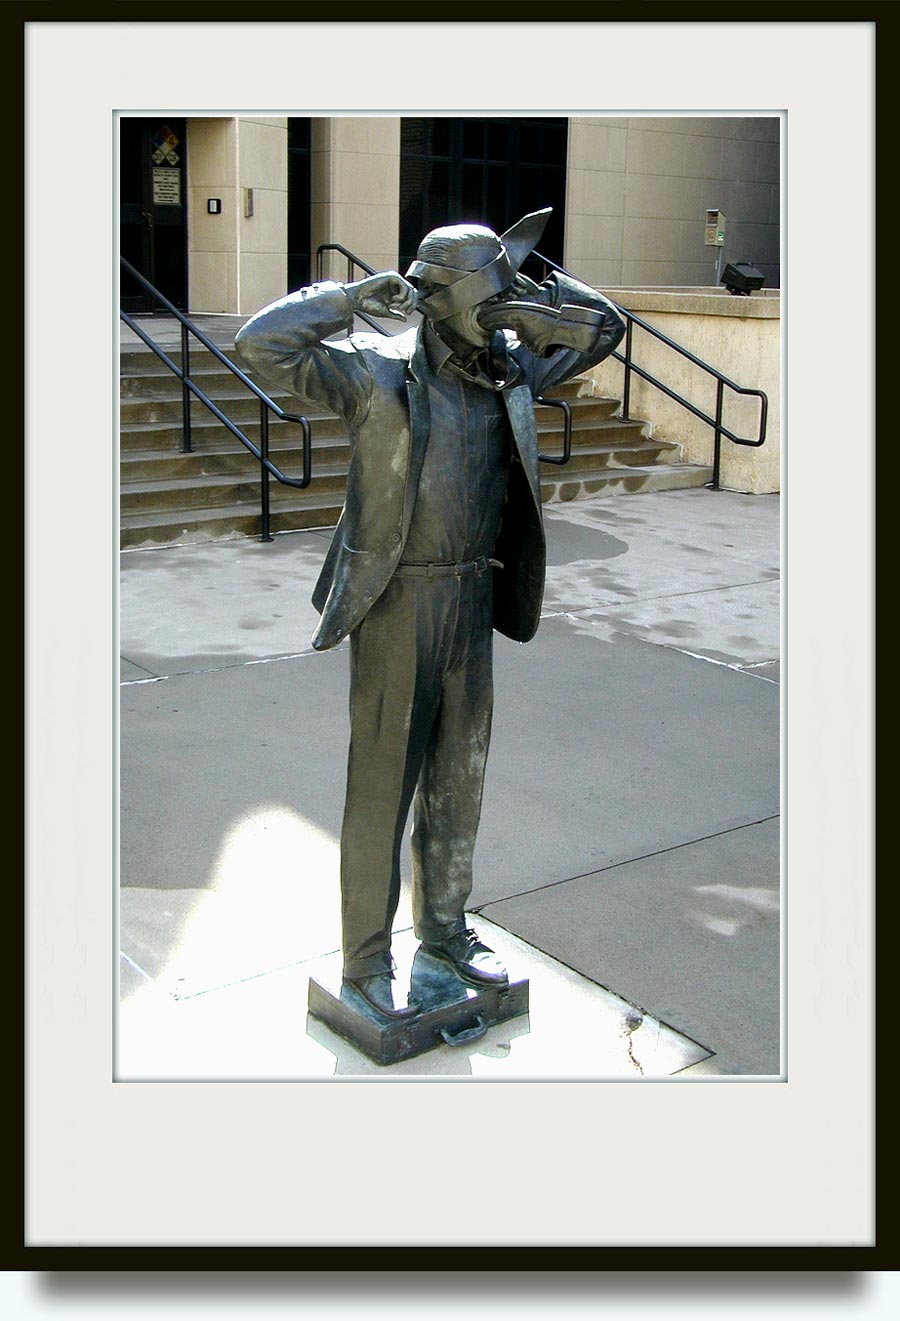 Terry Allen (b. 1943  in Wichita, Kansas). Modern Communication. 1995. Bronze. Commissioned by the Municipal Art Commision’s One-Percent-For-Art Program of Kansas City. Located 1111 Locust Street, New Communication Plaza (outside the Kansas City Police Department communications building),  in Downtown,Kansas City,Missouri,US. http://www.flickr.com/photos/chimphappyhour/1186411804/